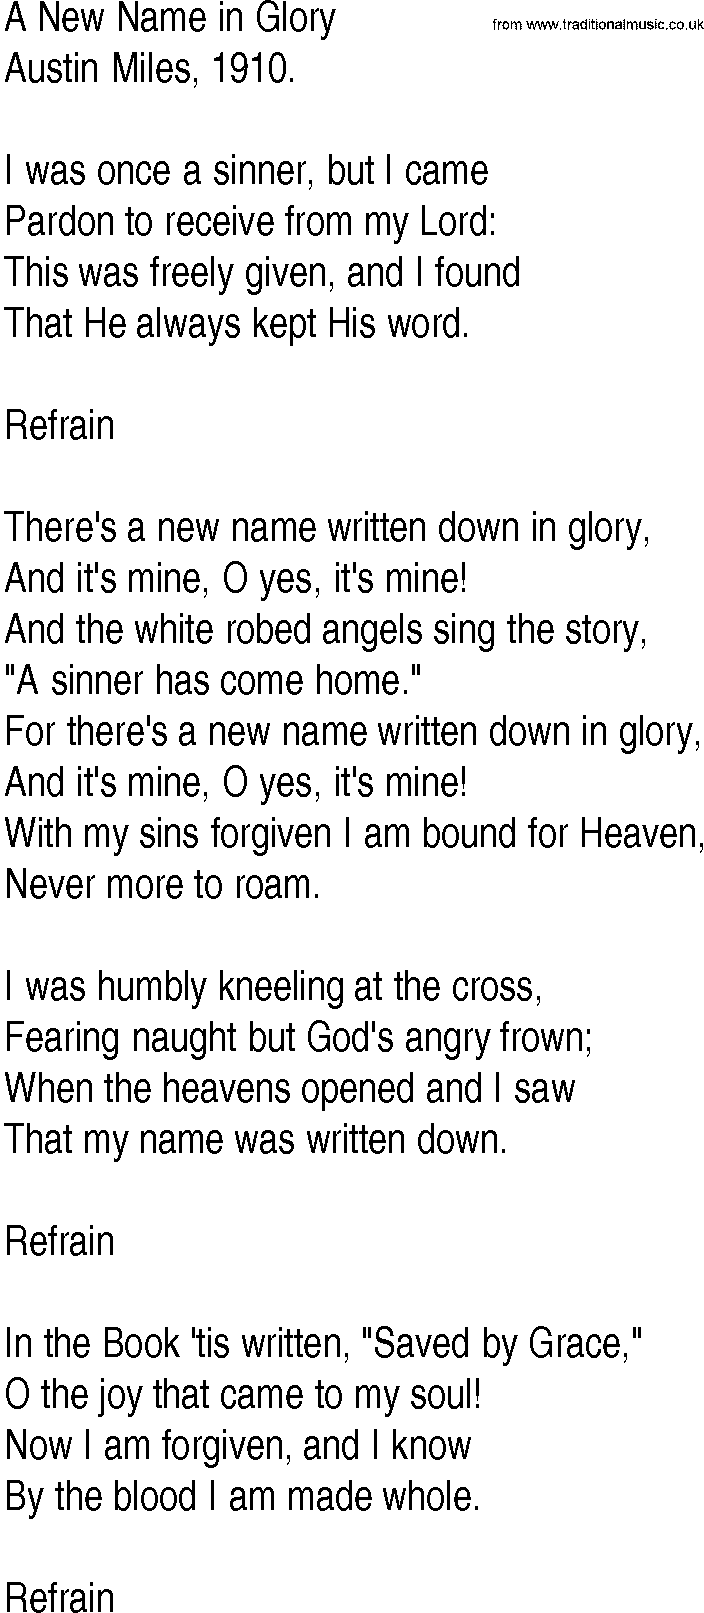 Hymn and Gospel Song: A New Name in Glory by Austin Miles lyrics